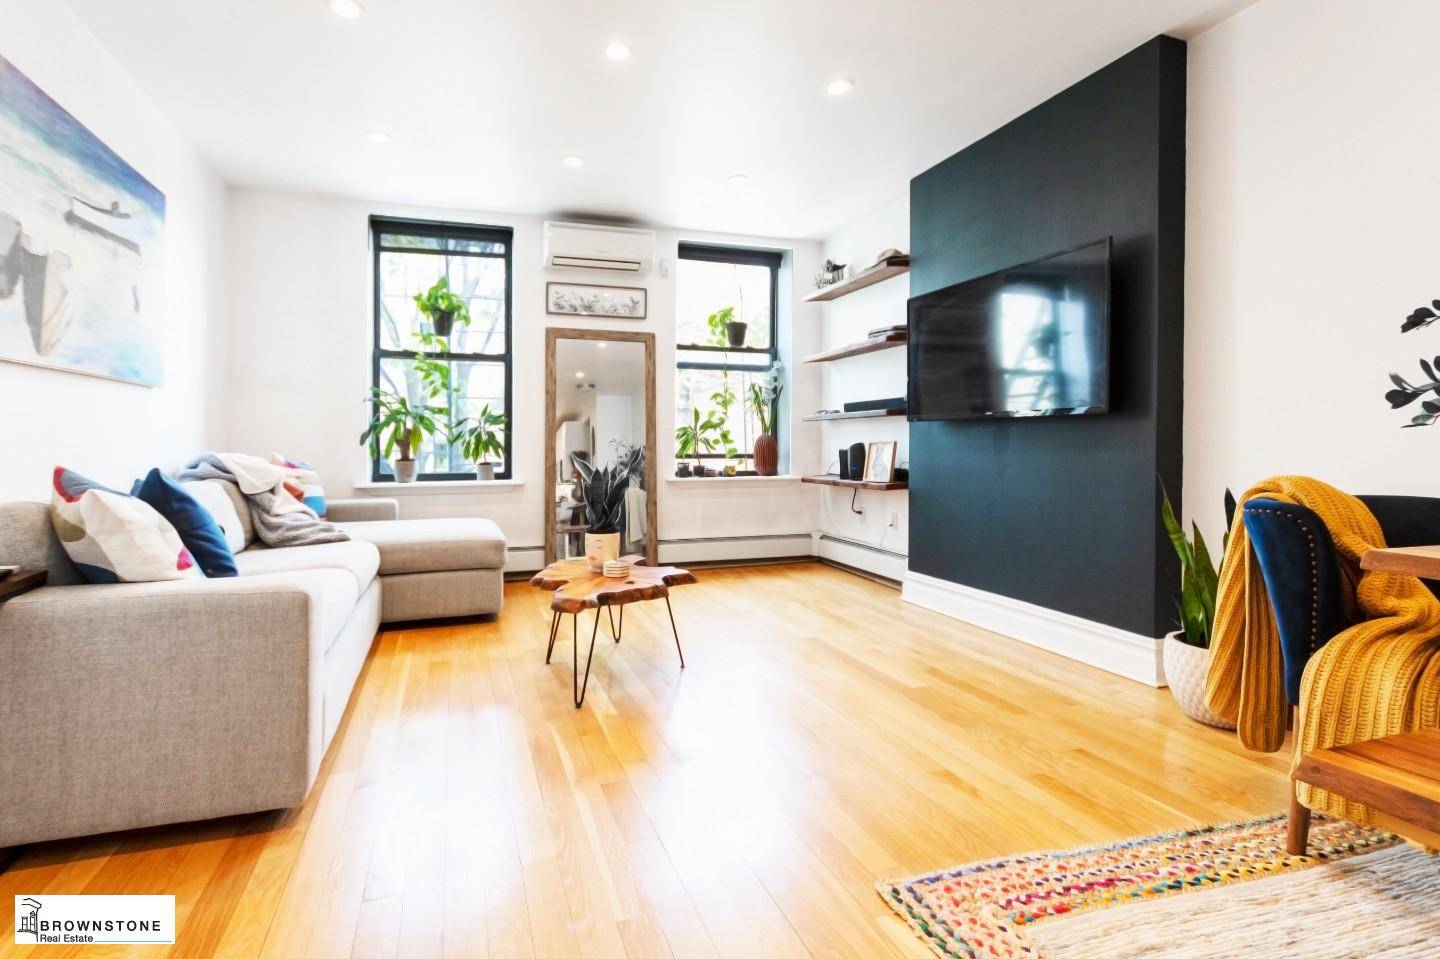 Don't miss this opportunity to reside in a unique Brooklyn oasis that creates the lifestyle you are longing for today.